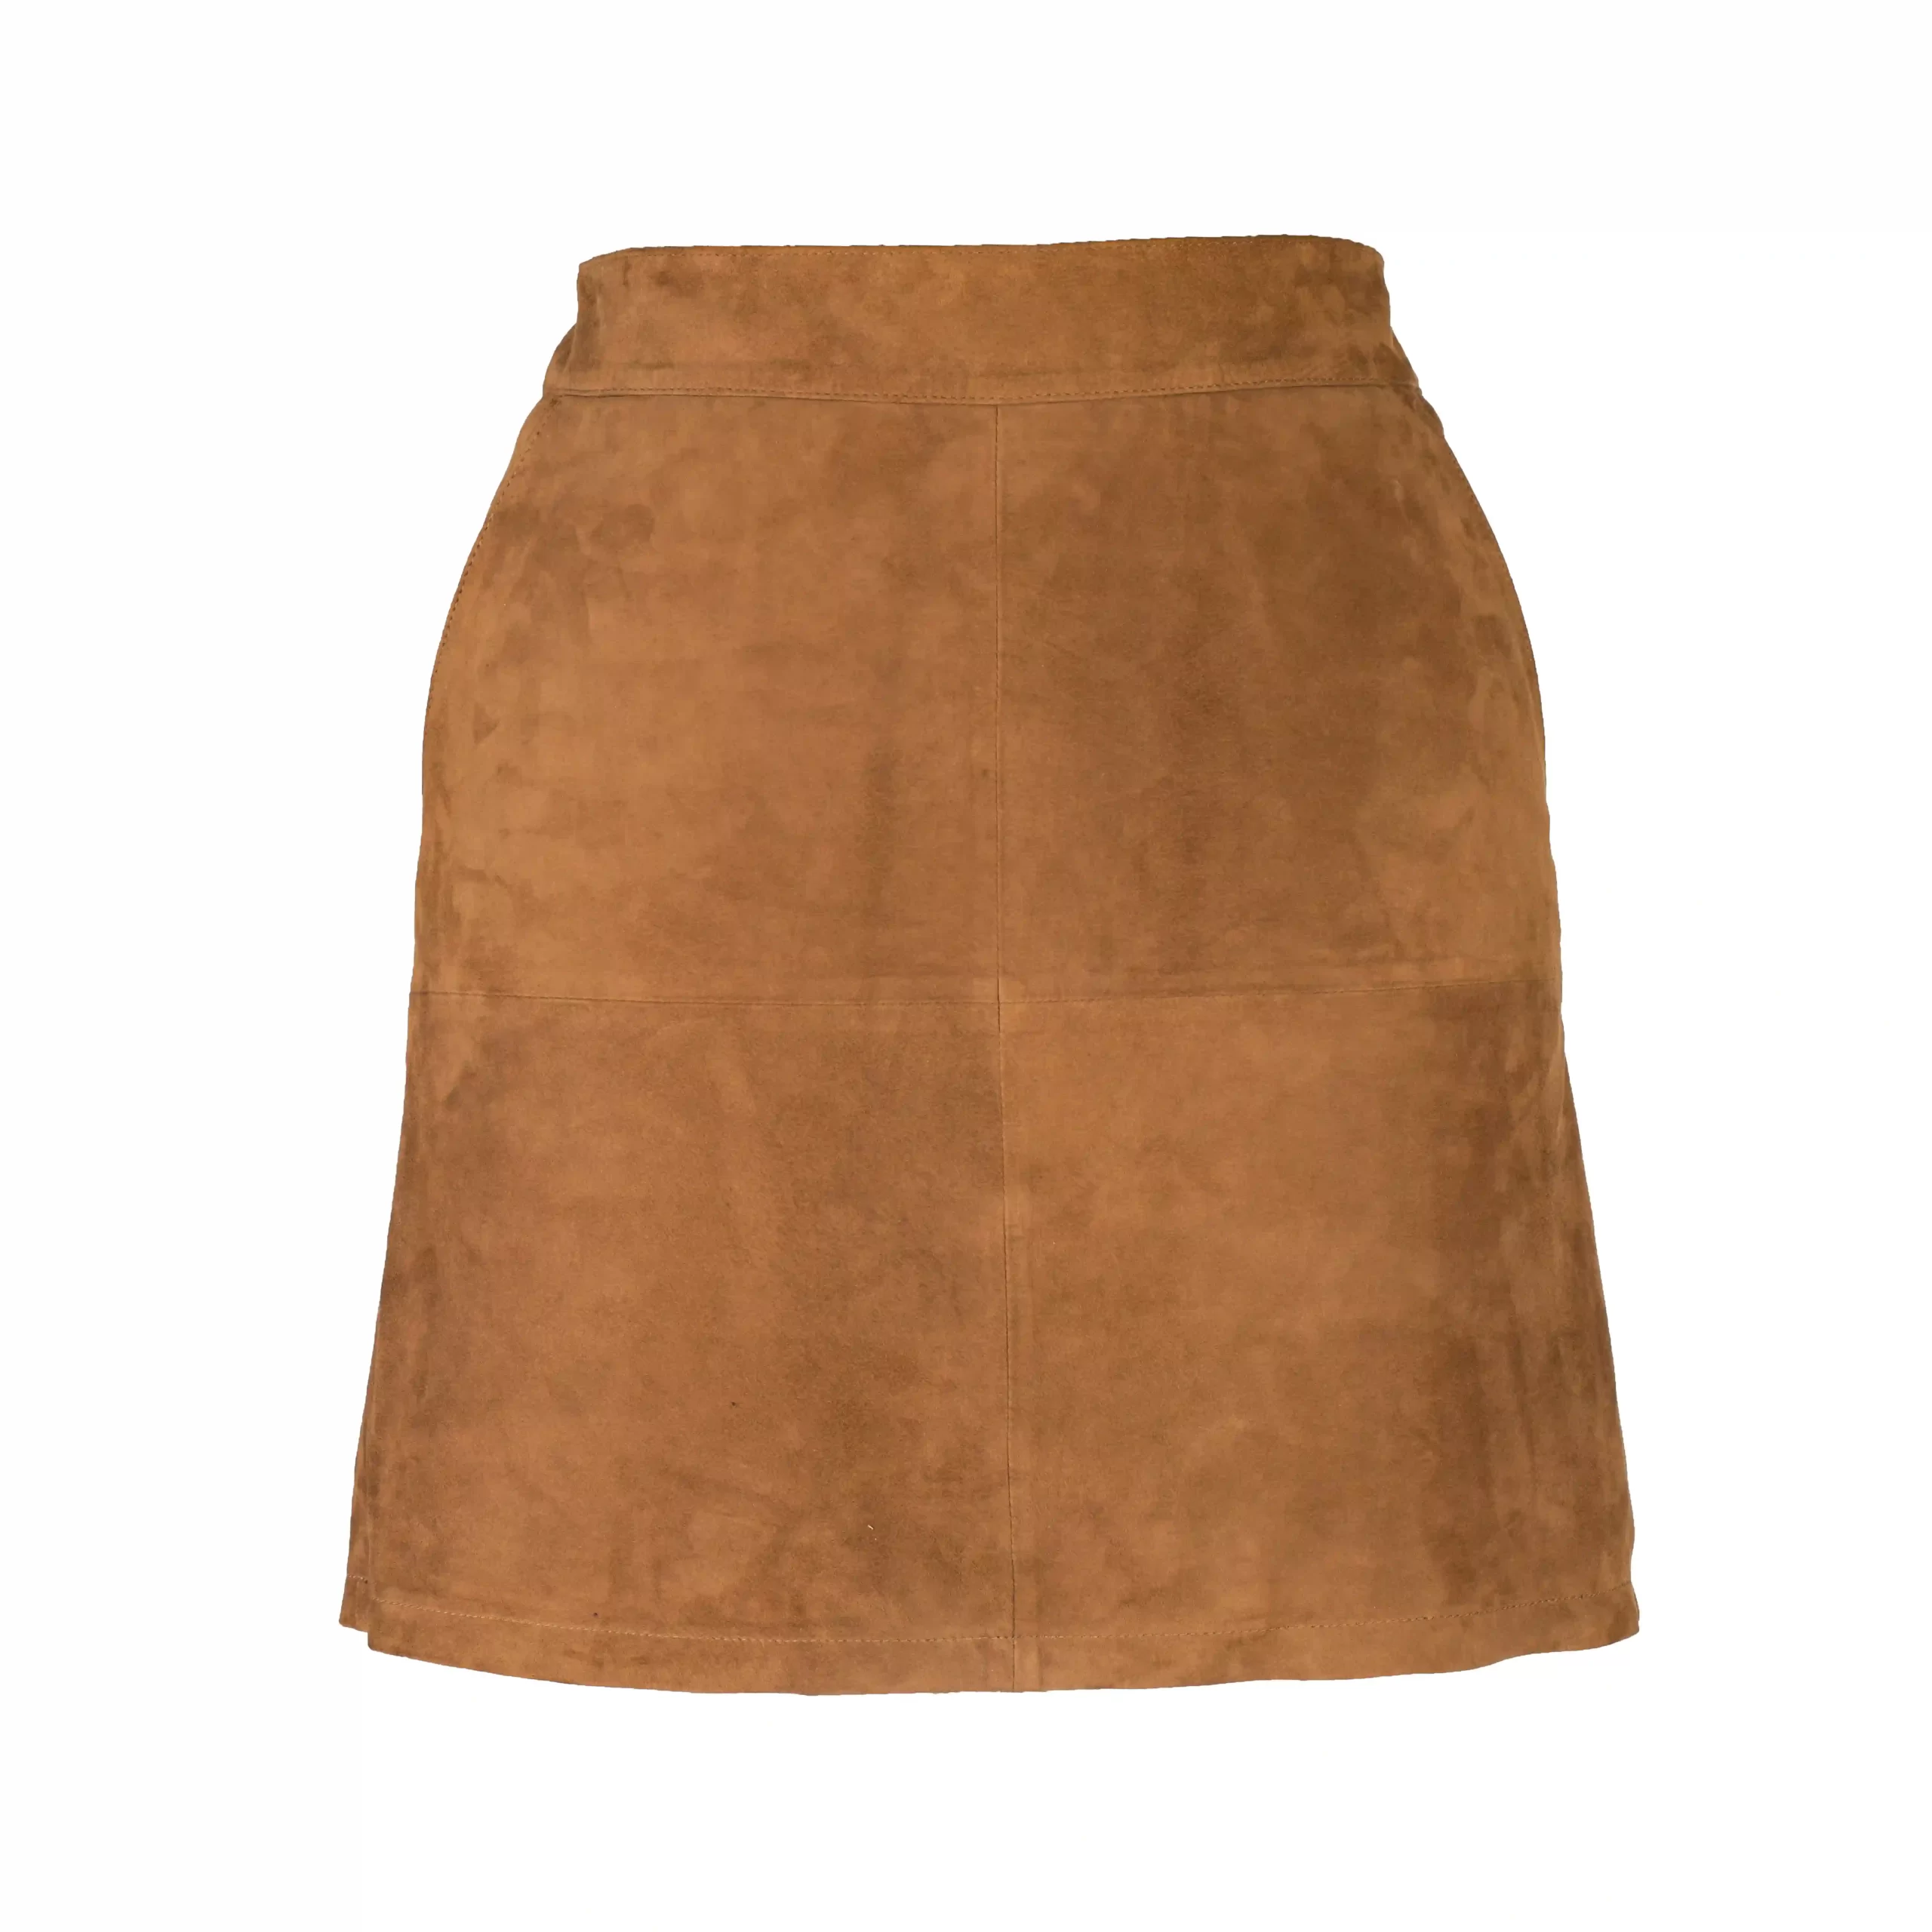 SUEDE LEATHER A-LINE SKIRT